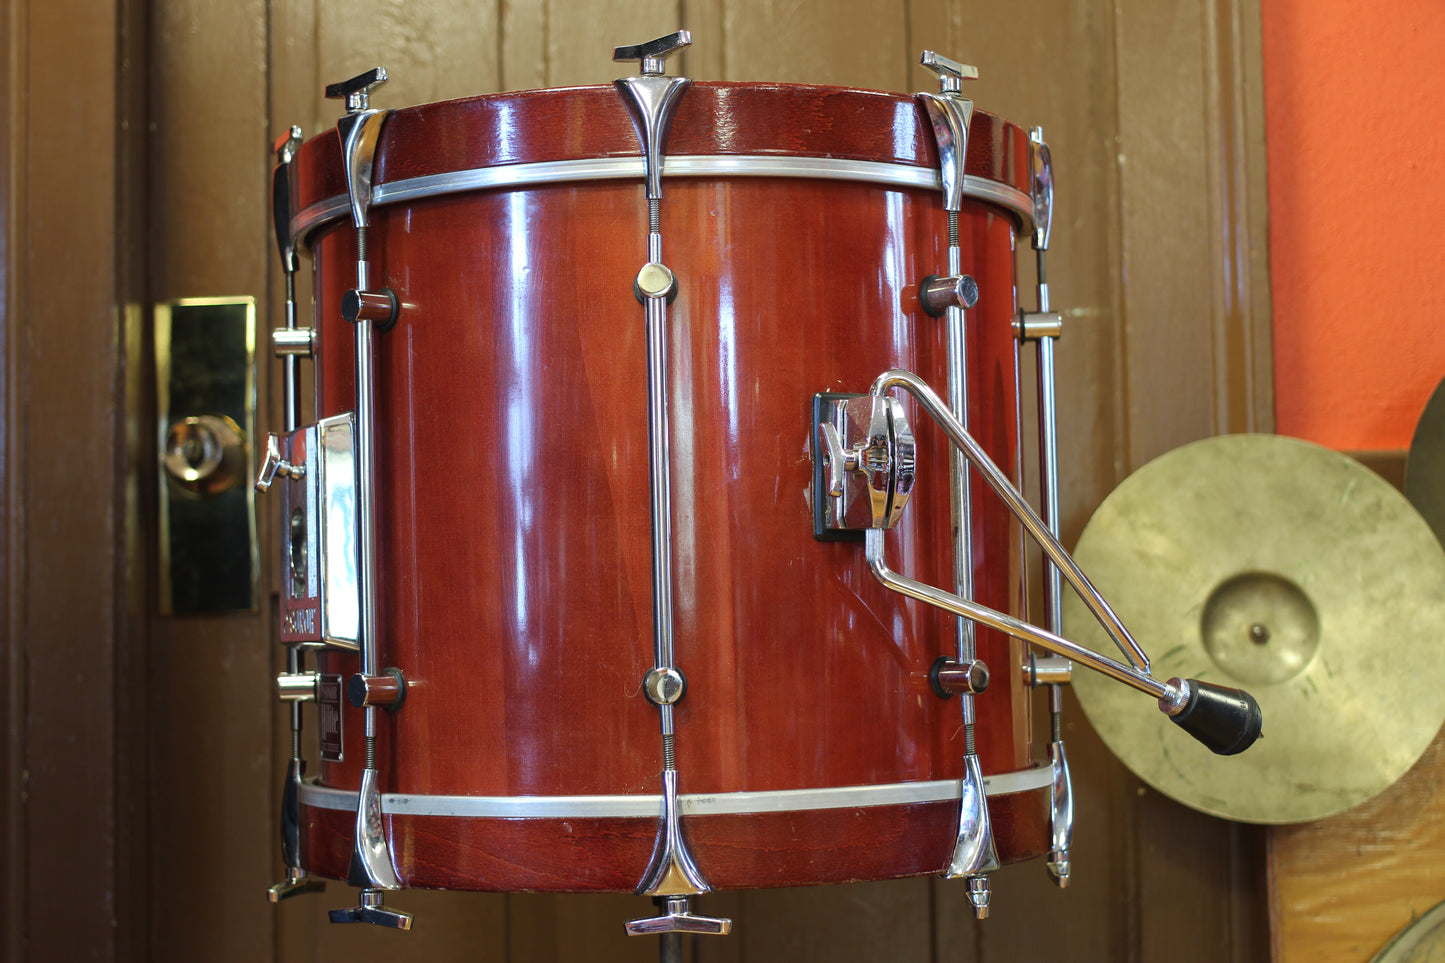 1990's Sonor Hilite in Red Maple 15x18 15x14 10x12 9x10